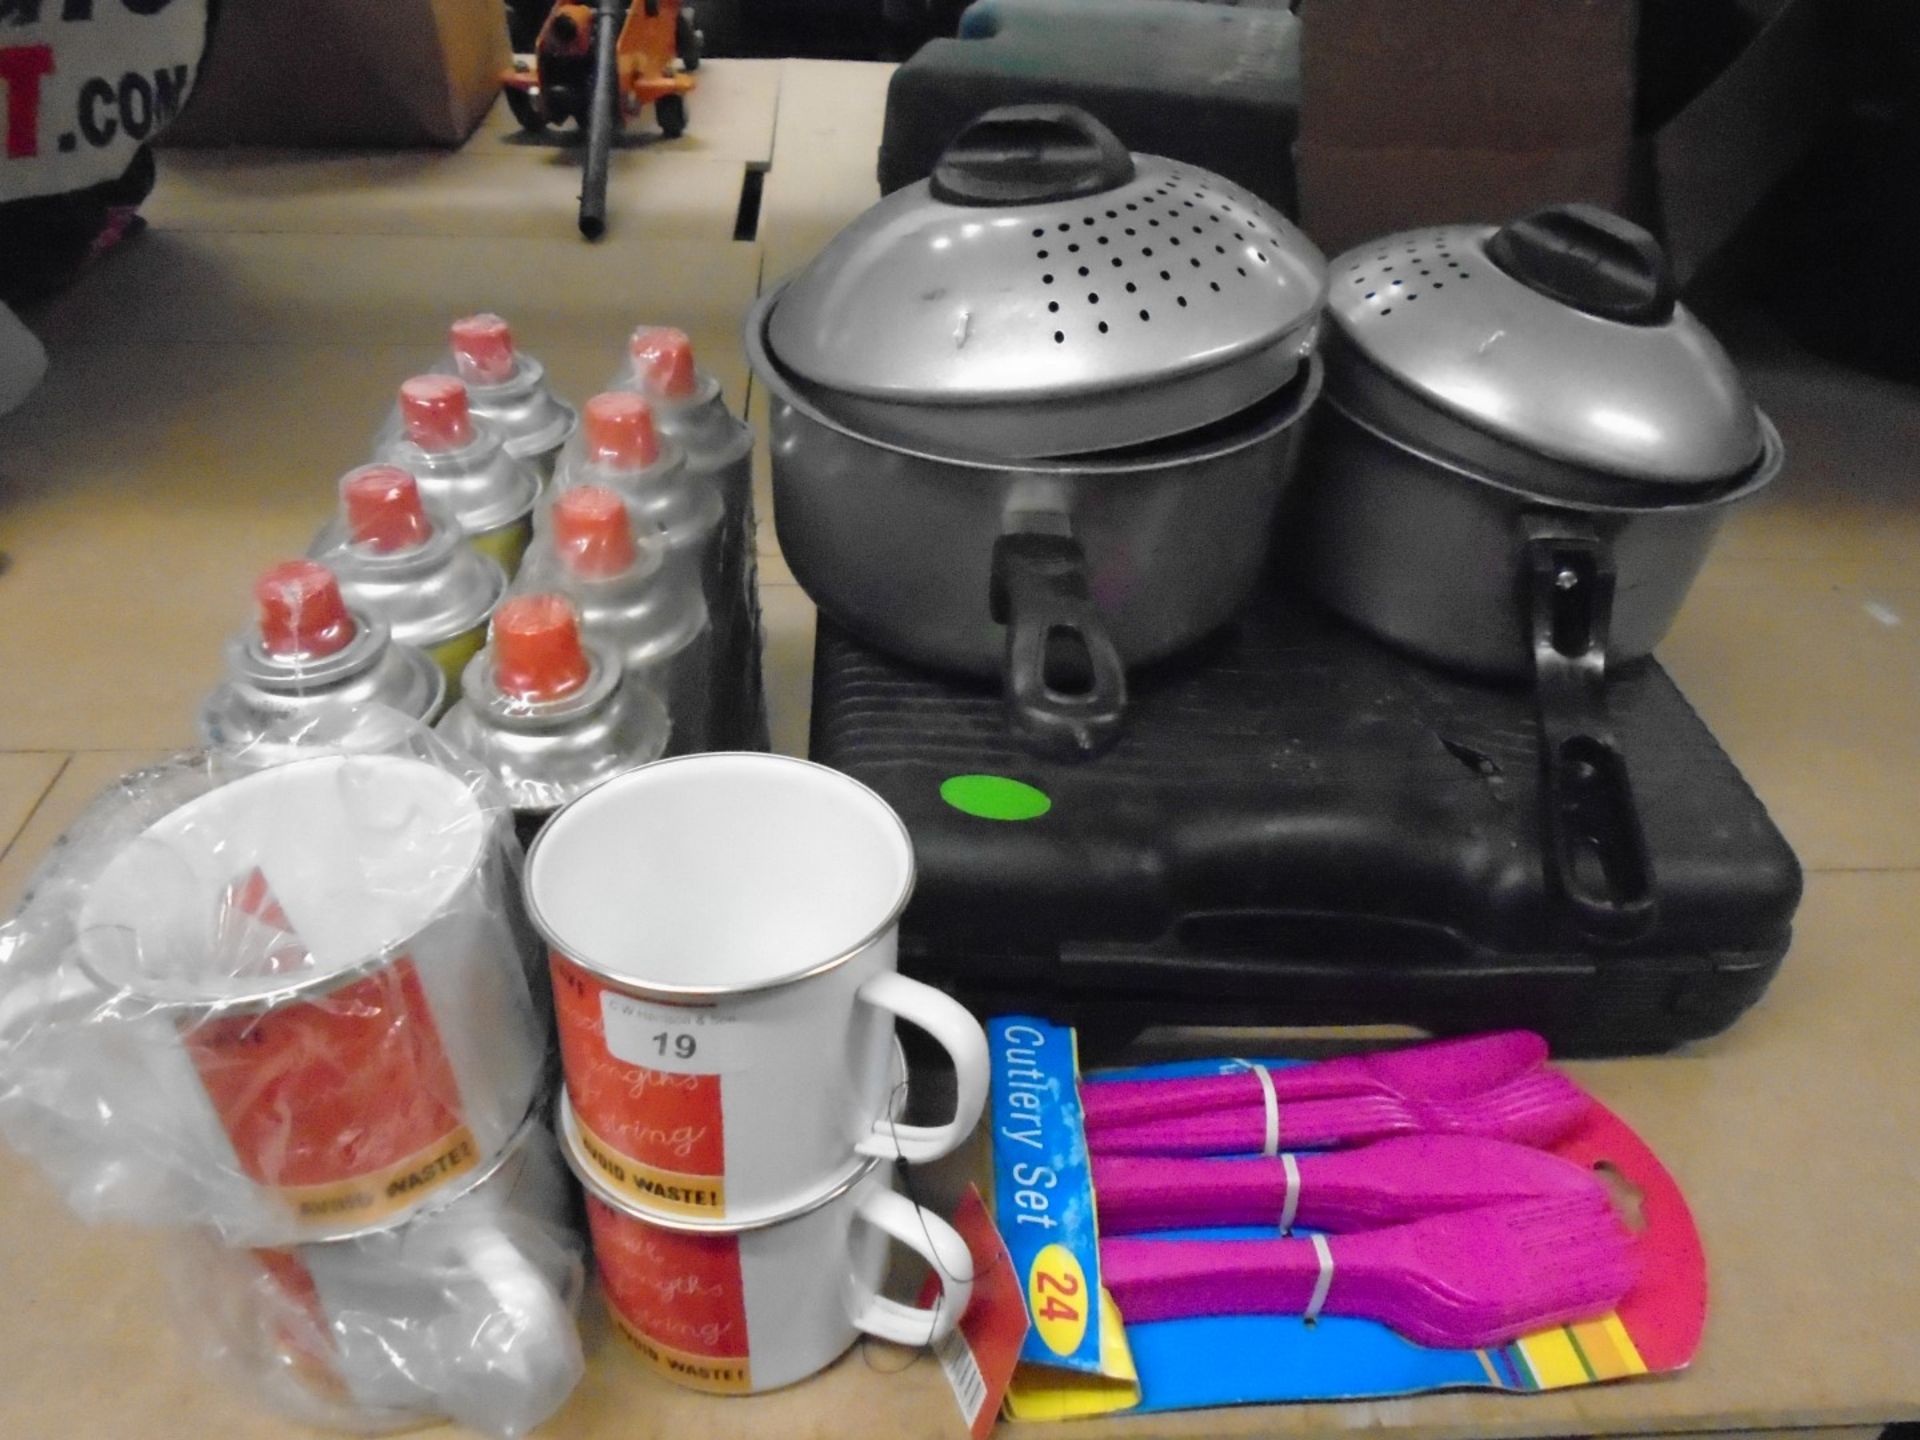 Pots and pans, camping stove, cups, plastic knives, Butane gas canisters,